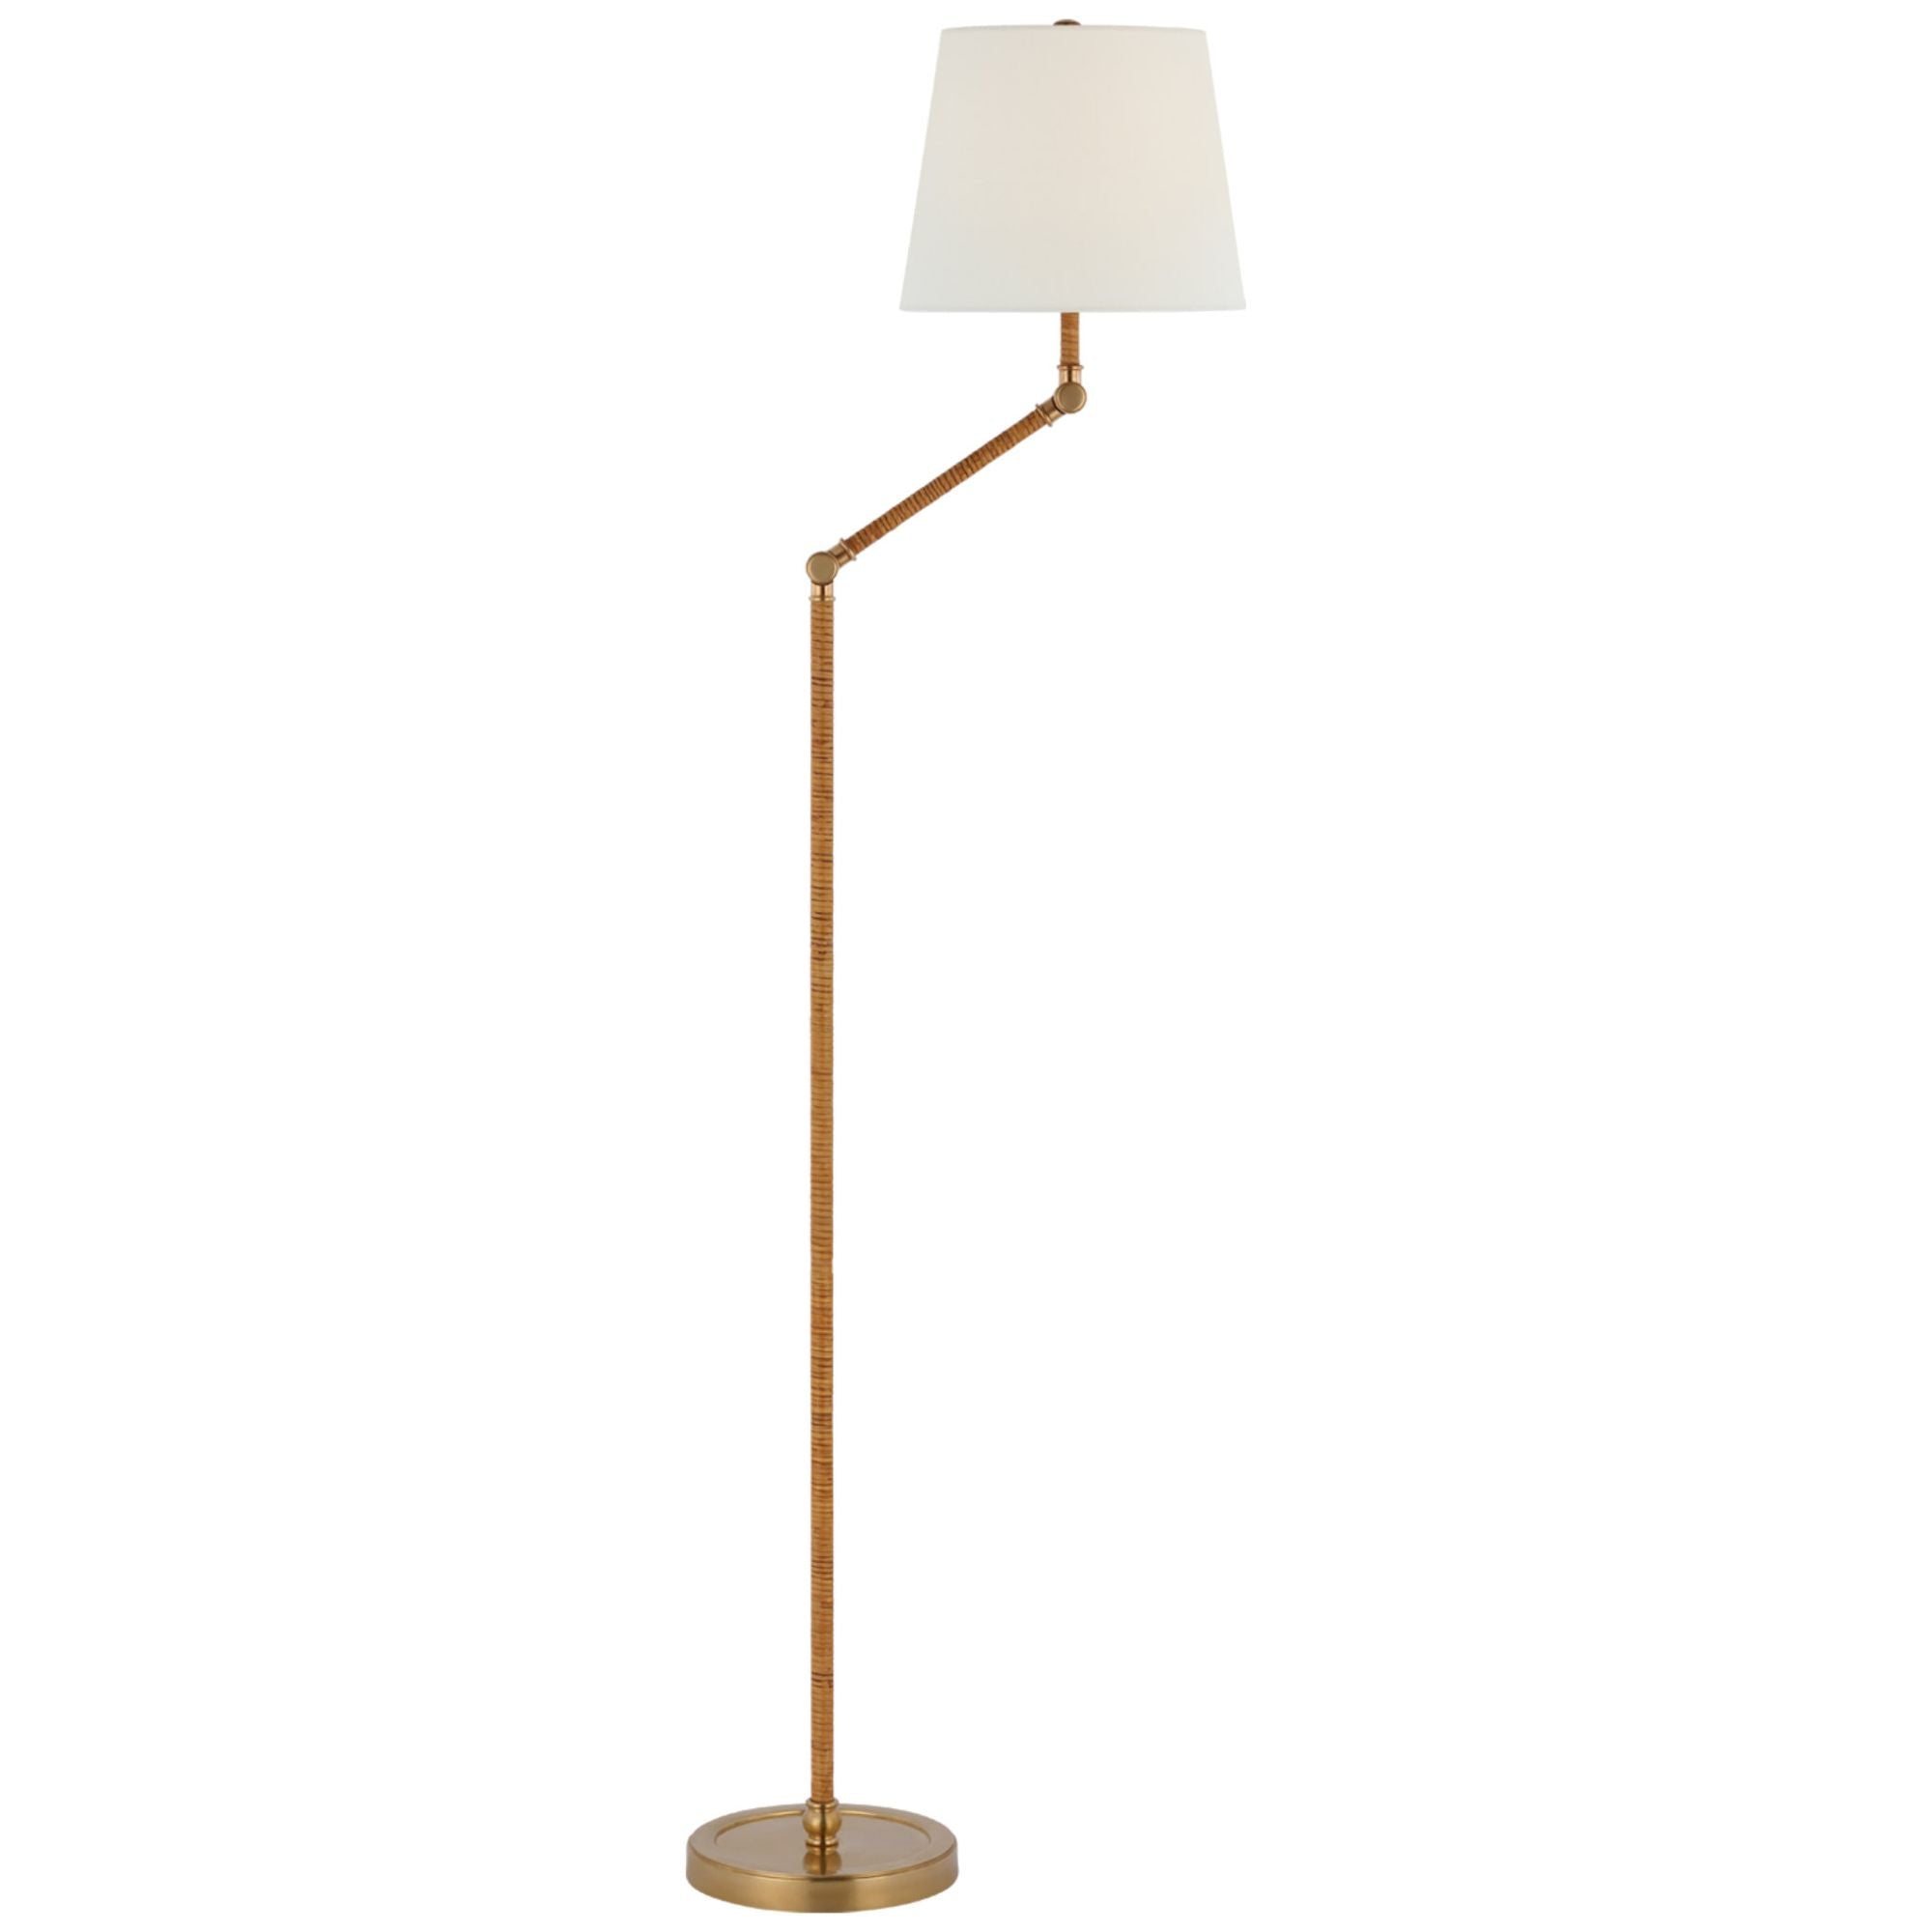 Chapman & Myers Basden Bridge Arm Floor Lamp in Antique-Burnished Brass and Natural Rattan with Linen Shade